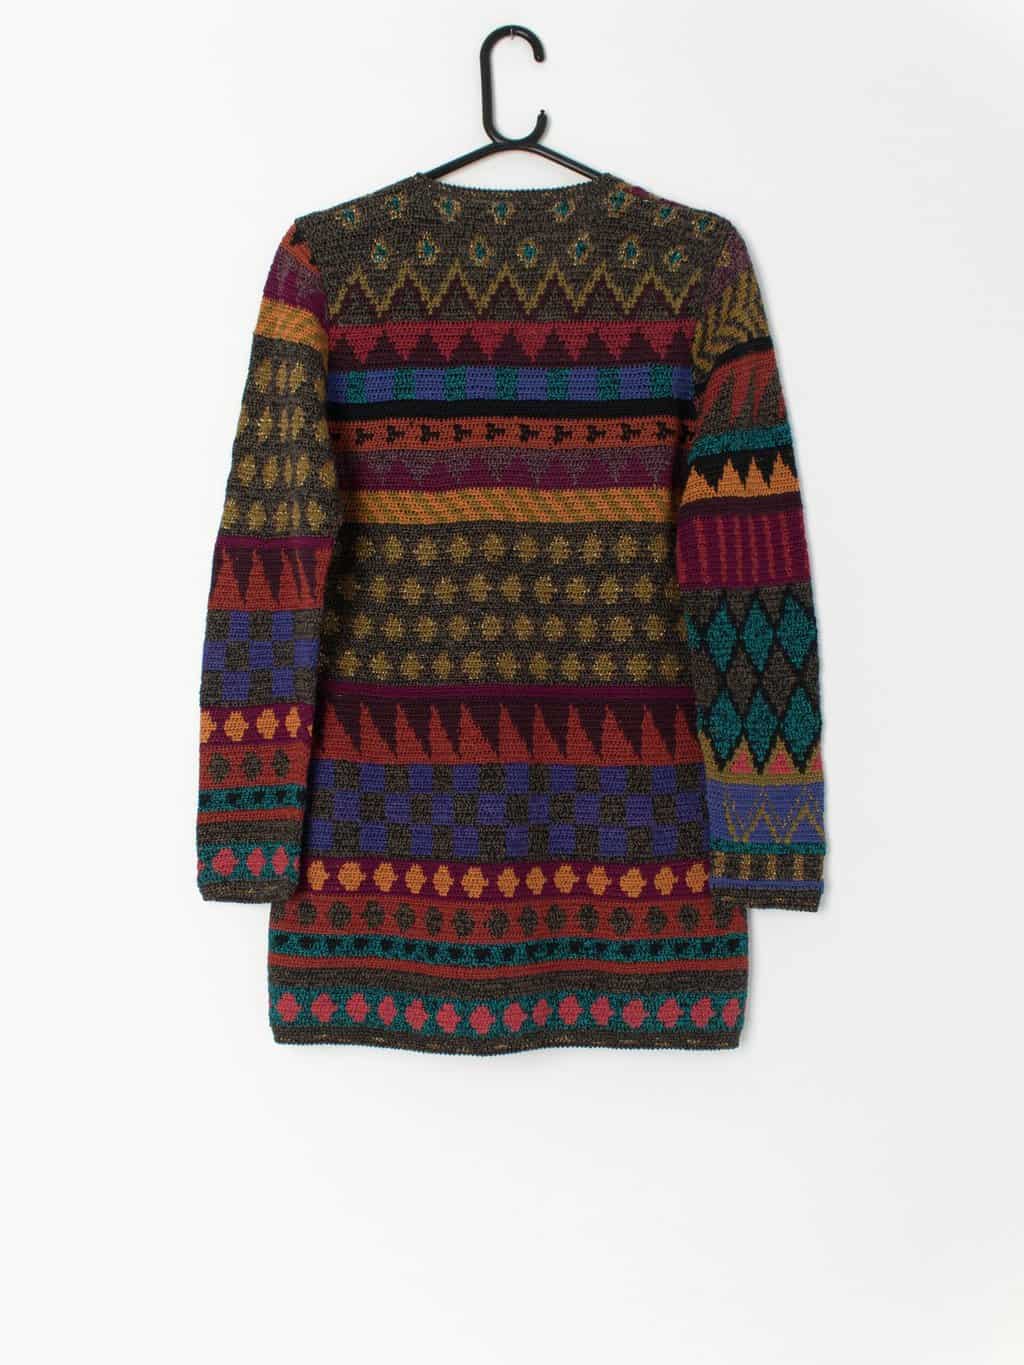 Vintage pima cotton cardigan by Peruvian Connection - Small